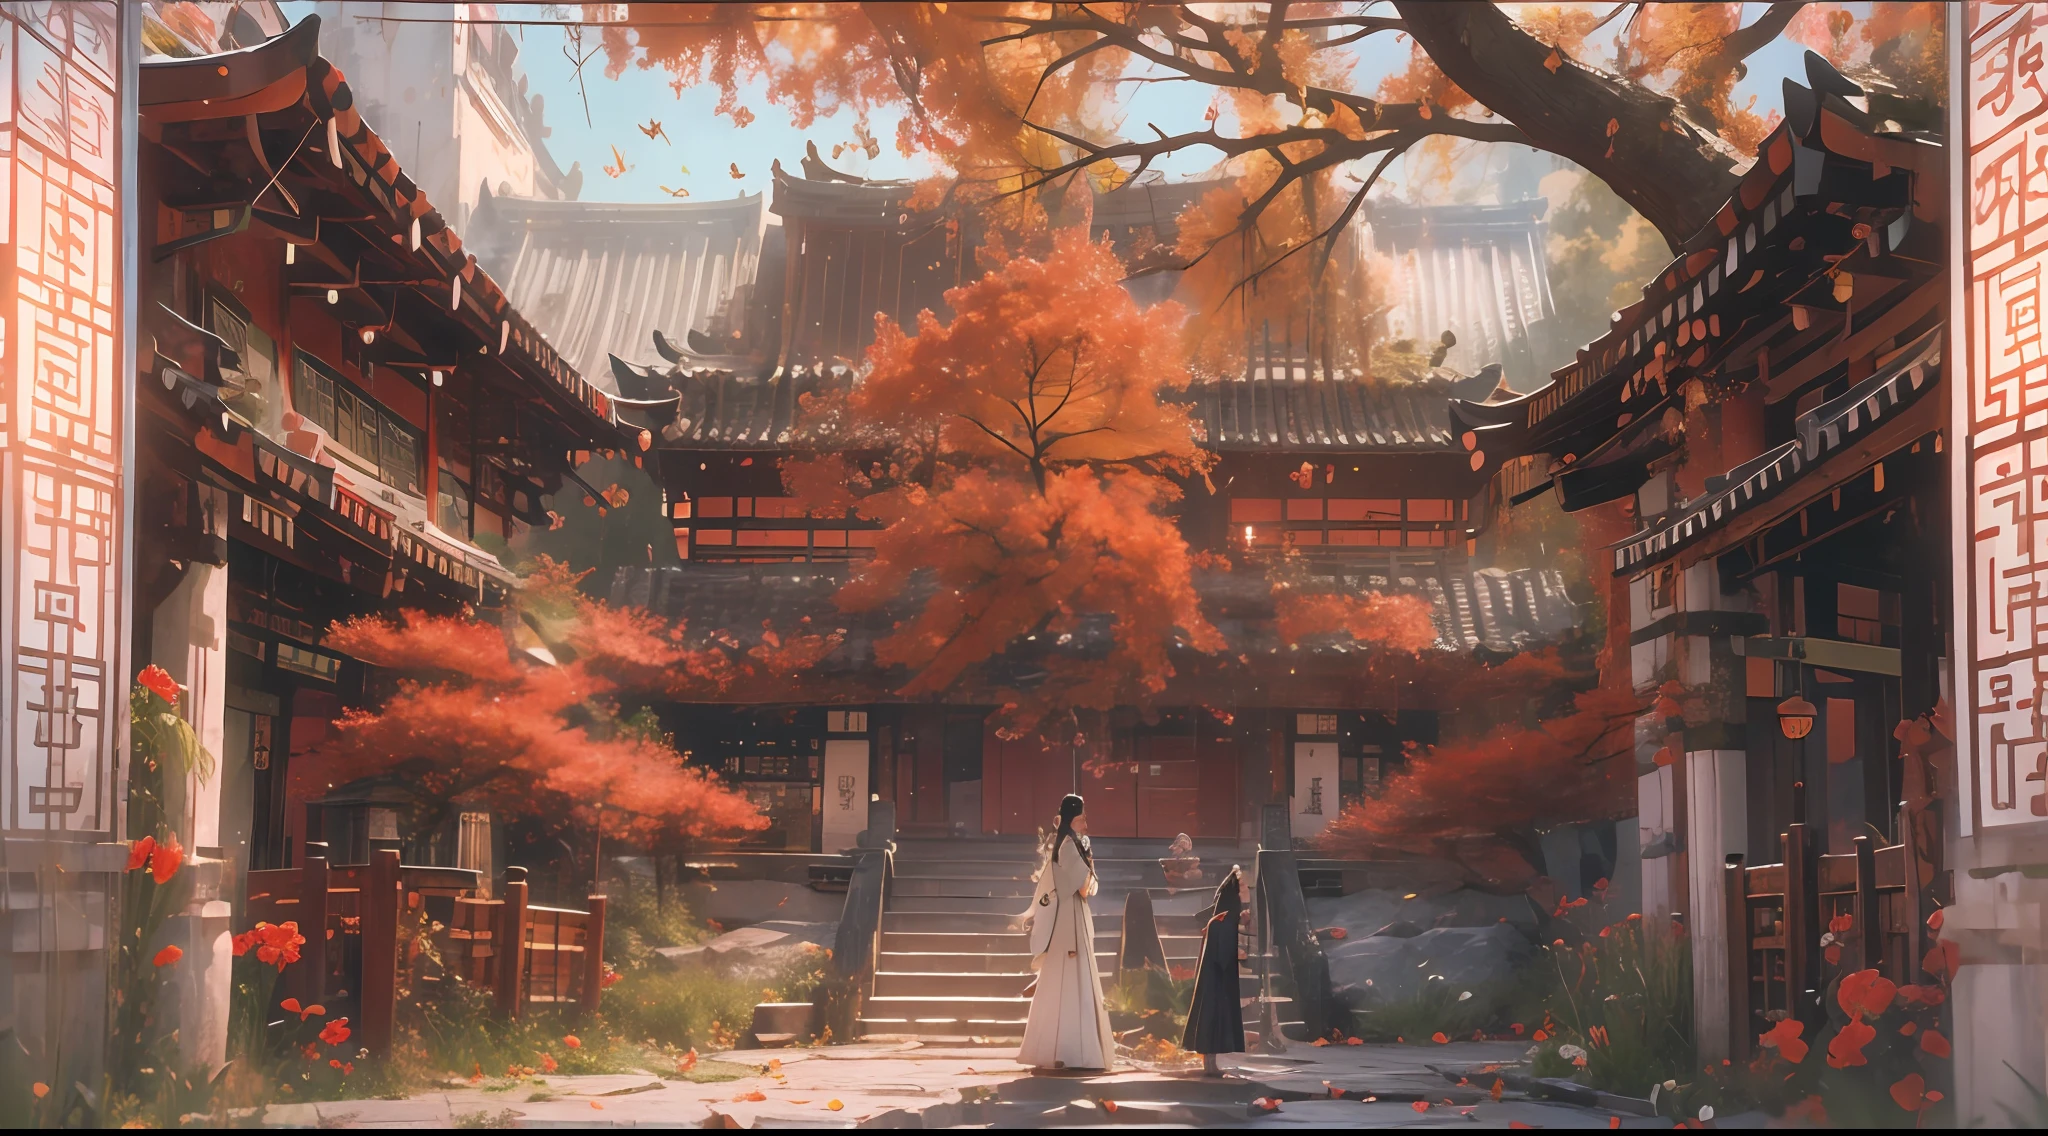 （tmasterpiece：1.2），best qualtiy，realisticlying，Tyndall effect，Underworld marriage，Spooky atmosphere，natta，Red palace lamp， The tree， scenecy， exteriors， "Young, Handsome and beautiful aristocratic couple traveling in the underworld，Detailed eyes，Clear facial features"，Japanese clothes， east asian architecture， buliding， Skysky， nigh sky， stairways，amaryllis